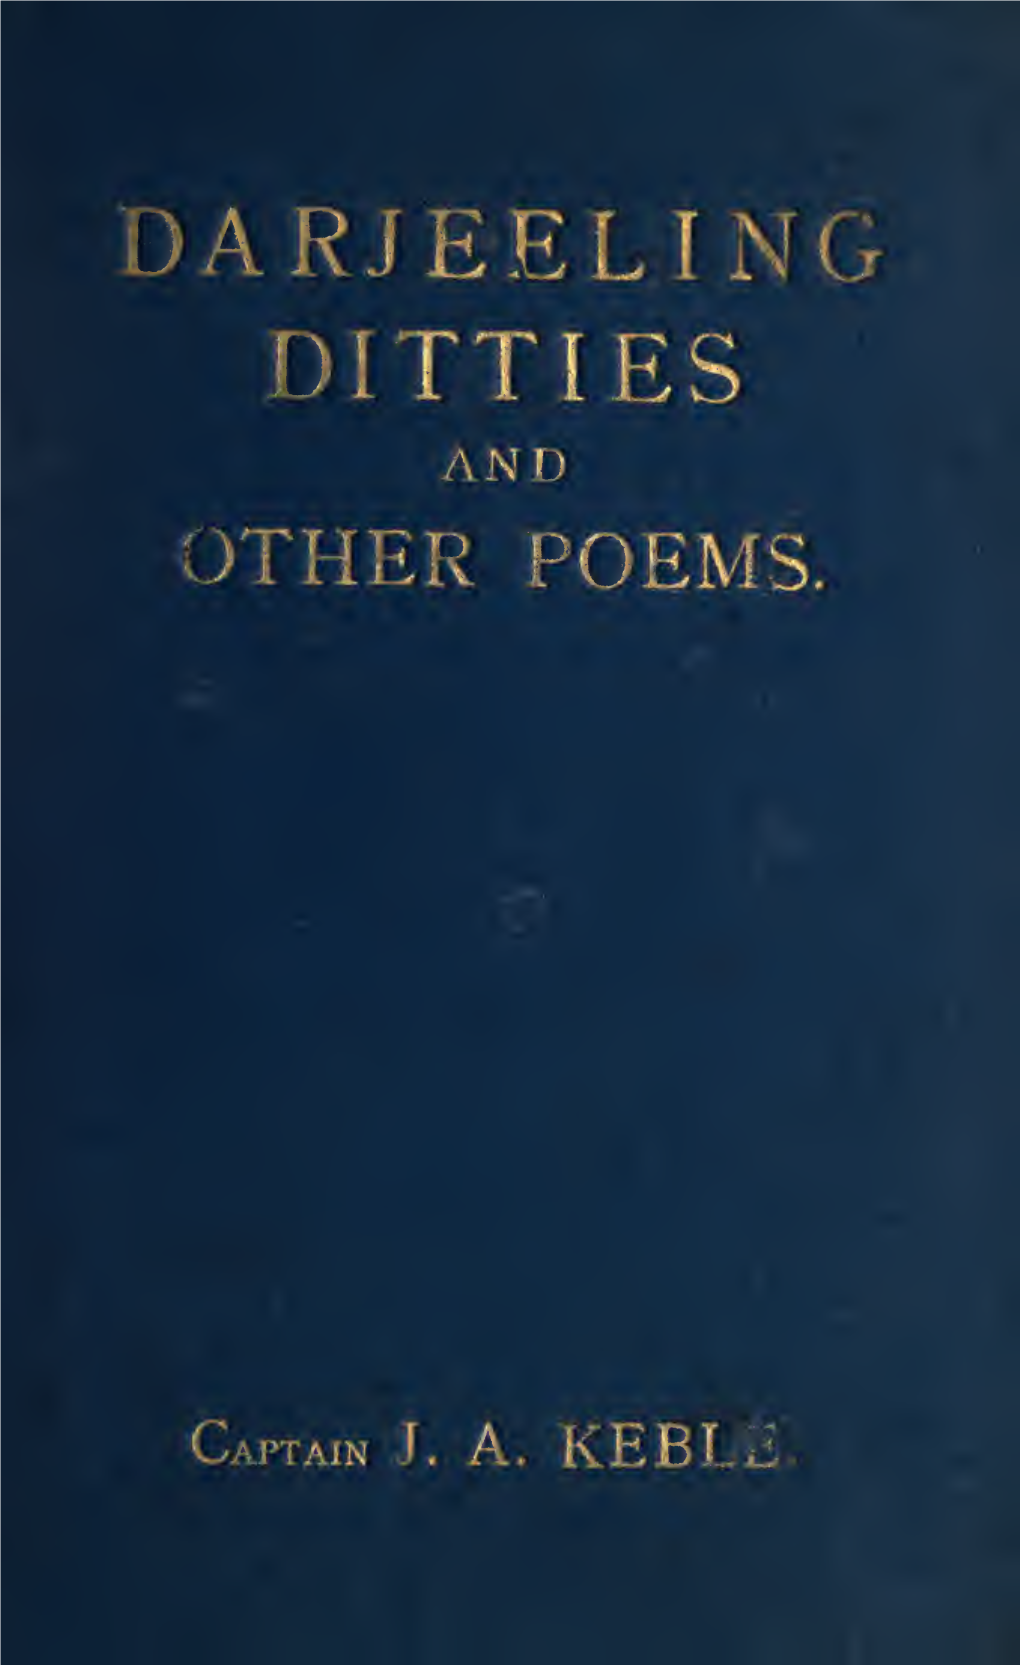 Darjeeling Ditties and Other Poems